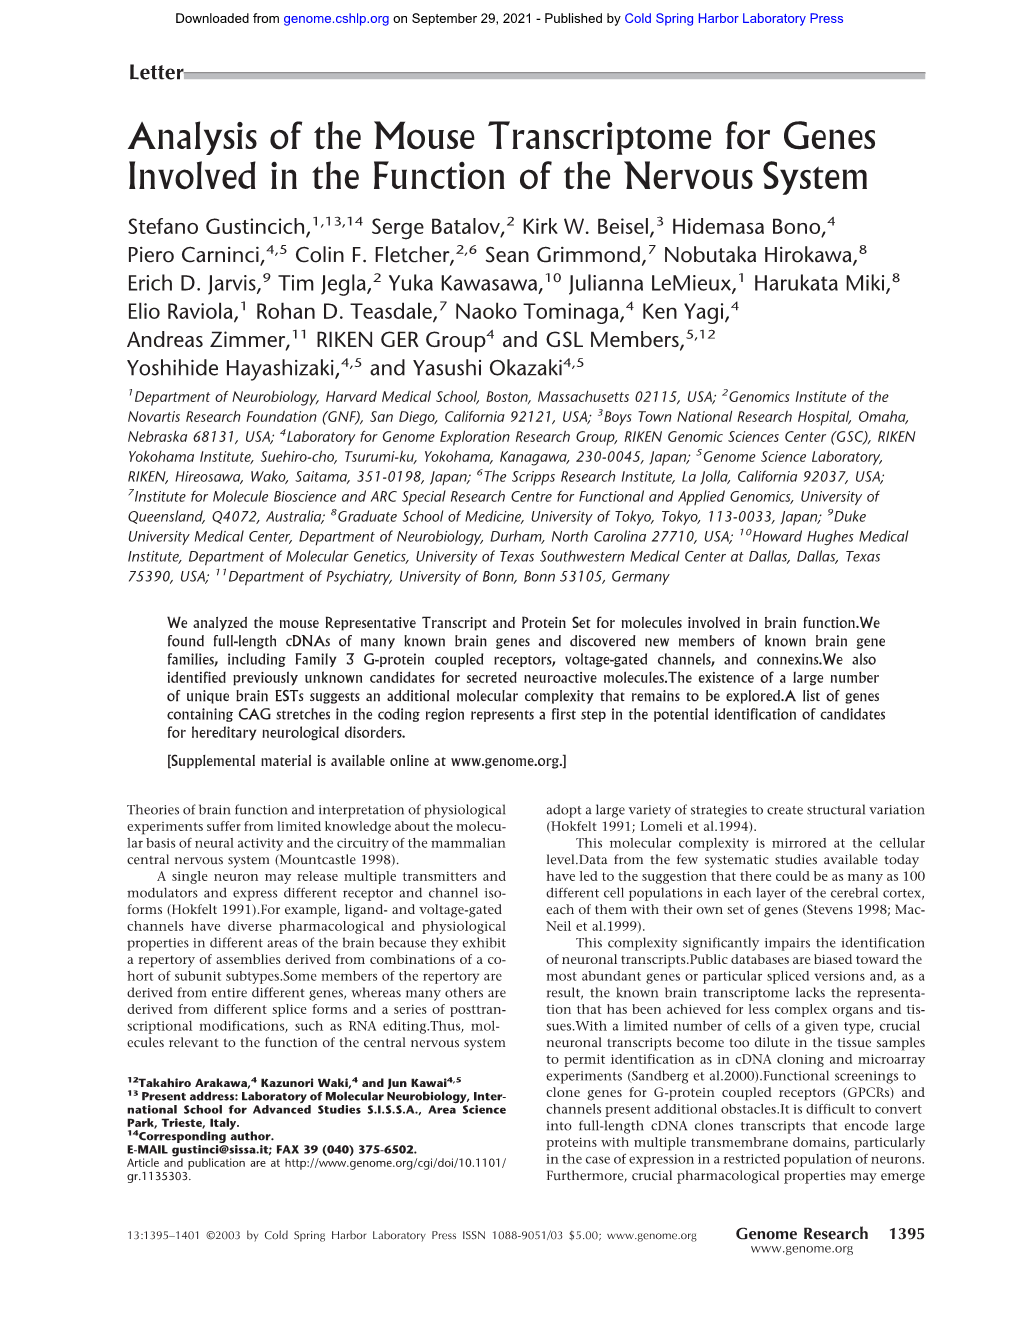 Analysis of the Mouse Transcriptome for Genes Involved in the Function of the Nervous System Stefano Gustincich,1,13,14 Serge Batalov,2 Kirk W